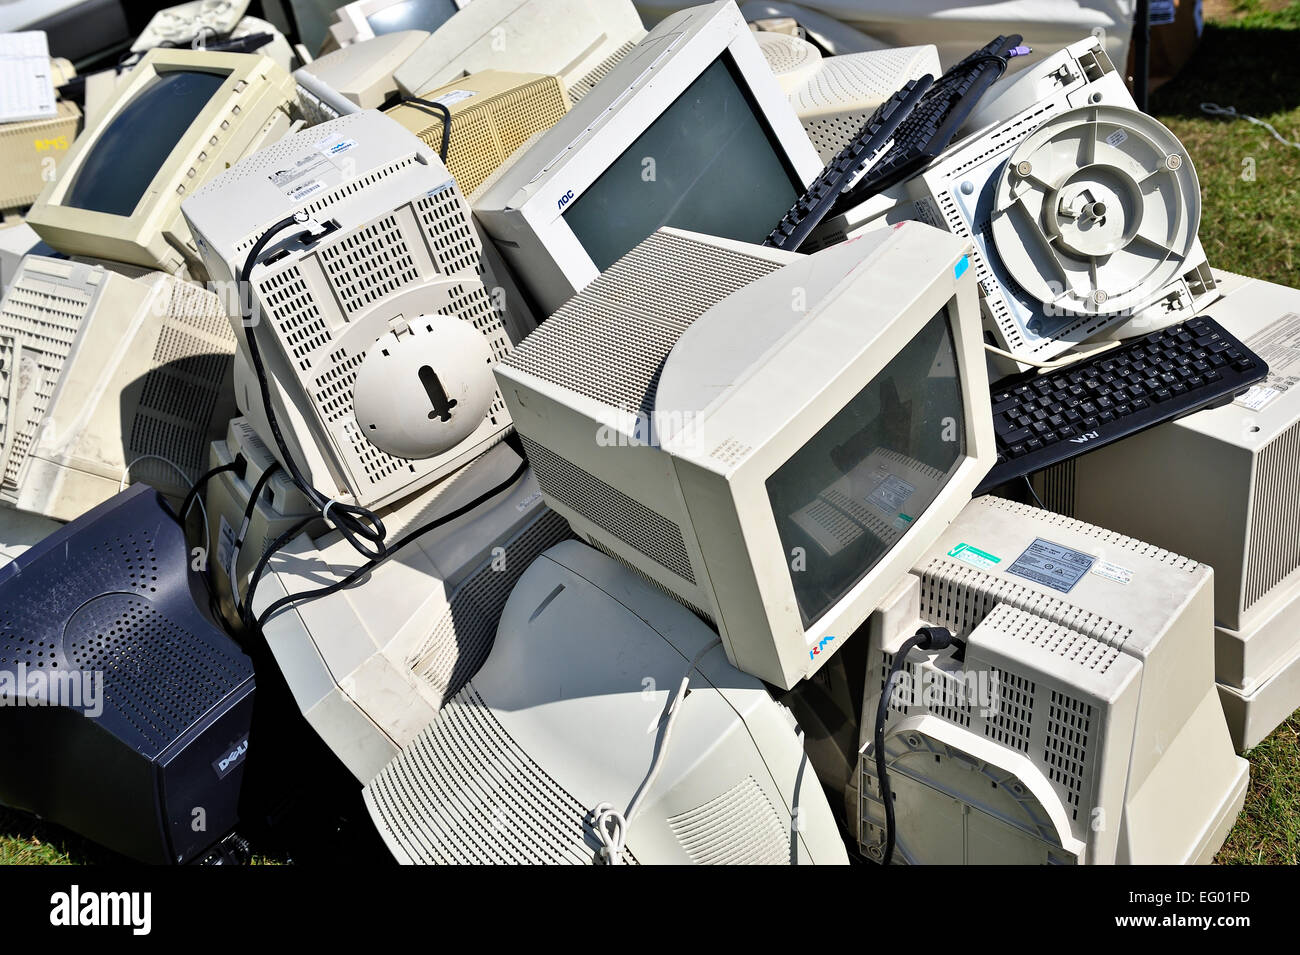 Pile of old computer monitors and keyboards Stock Photo